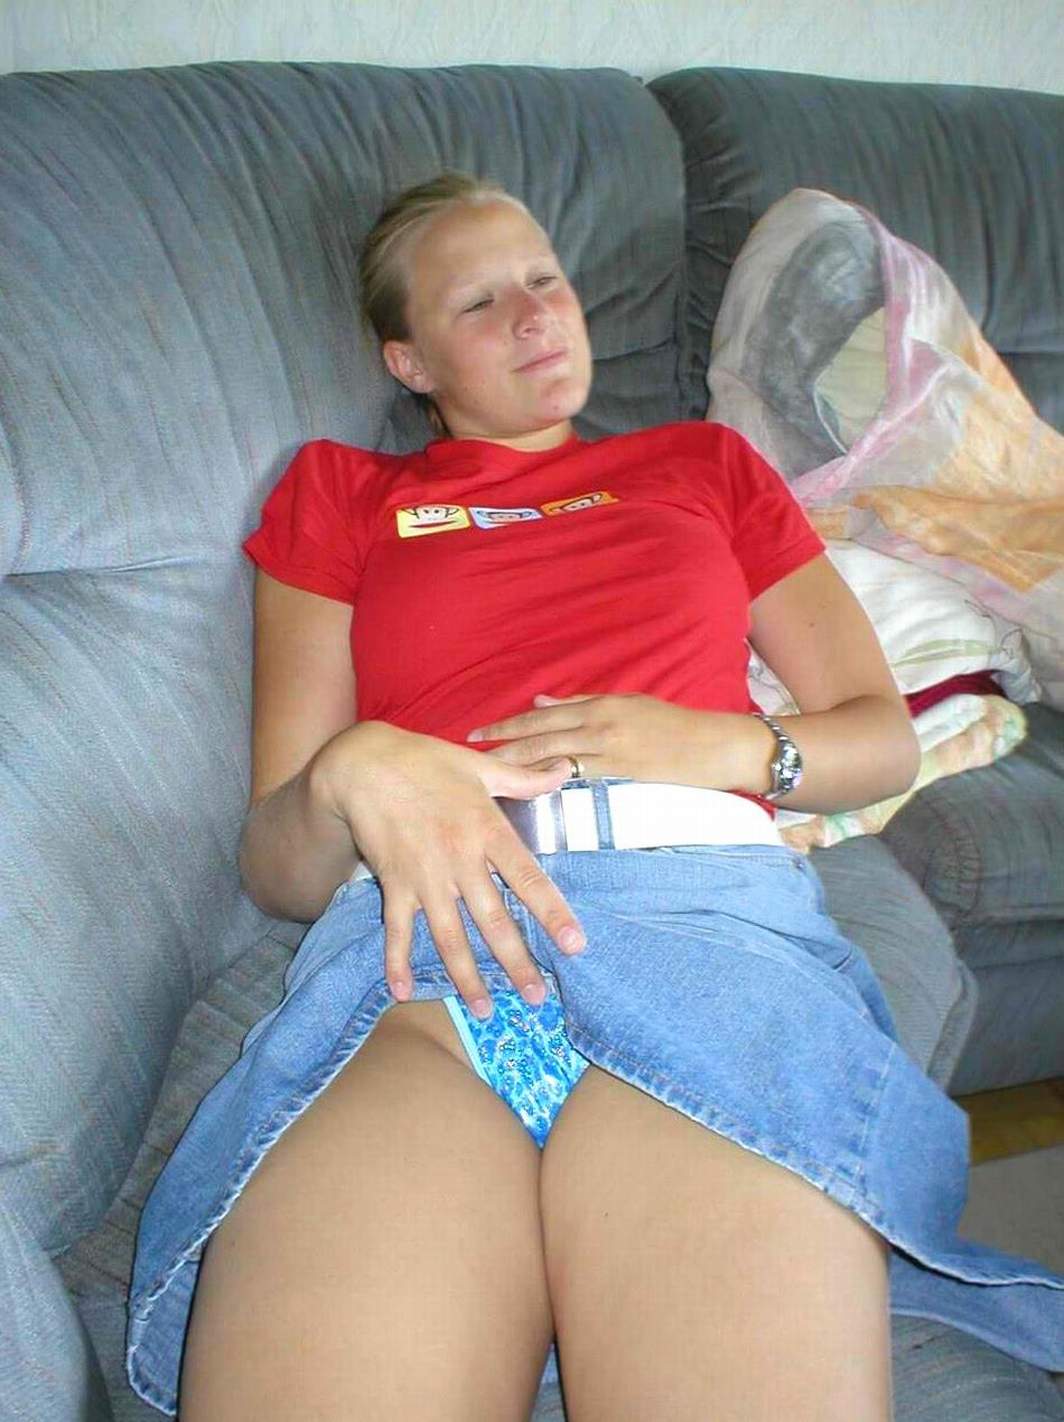 Amateur homemade Porn very hot archive FREE pic picture